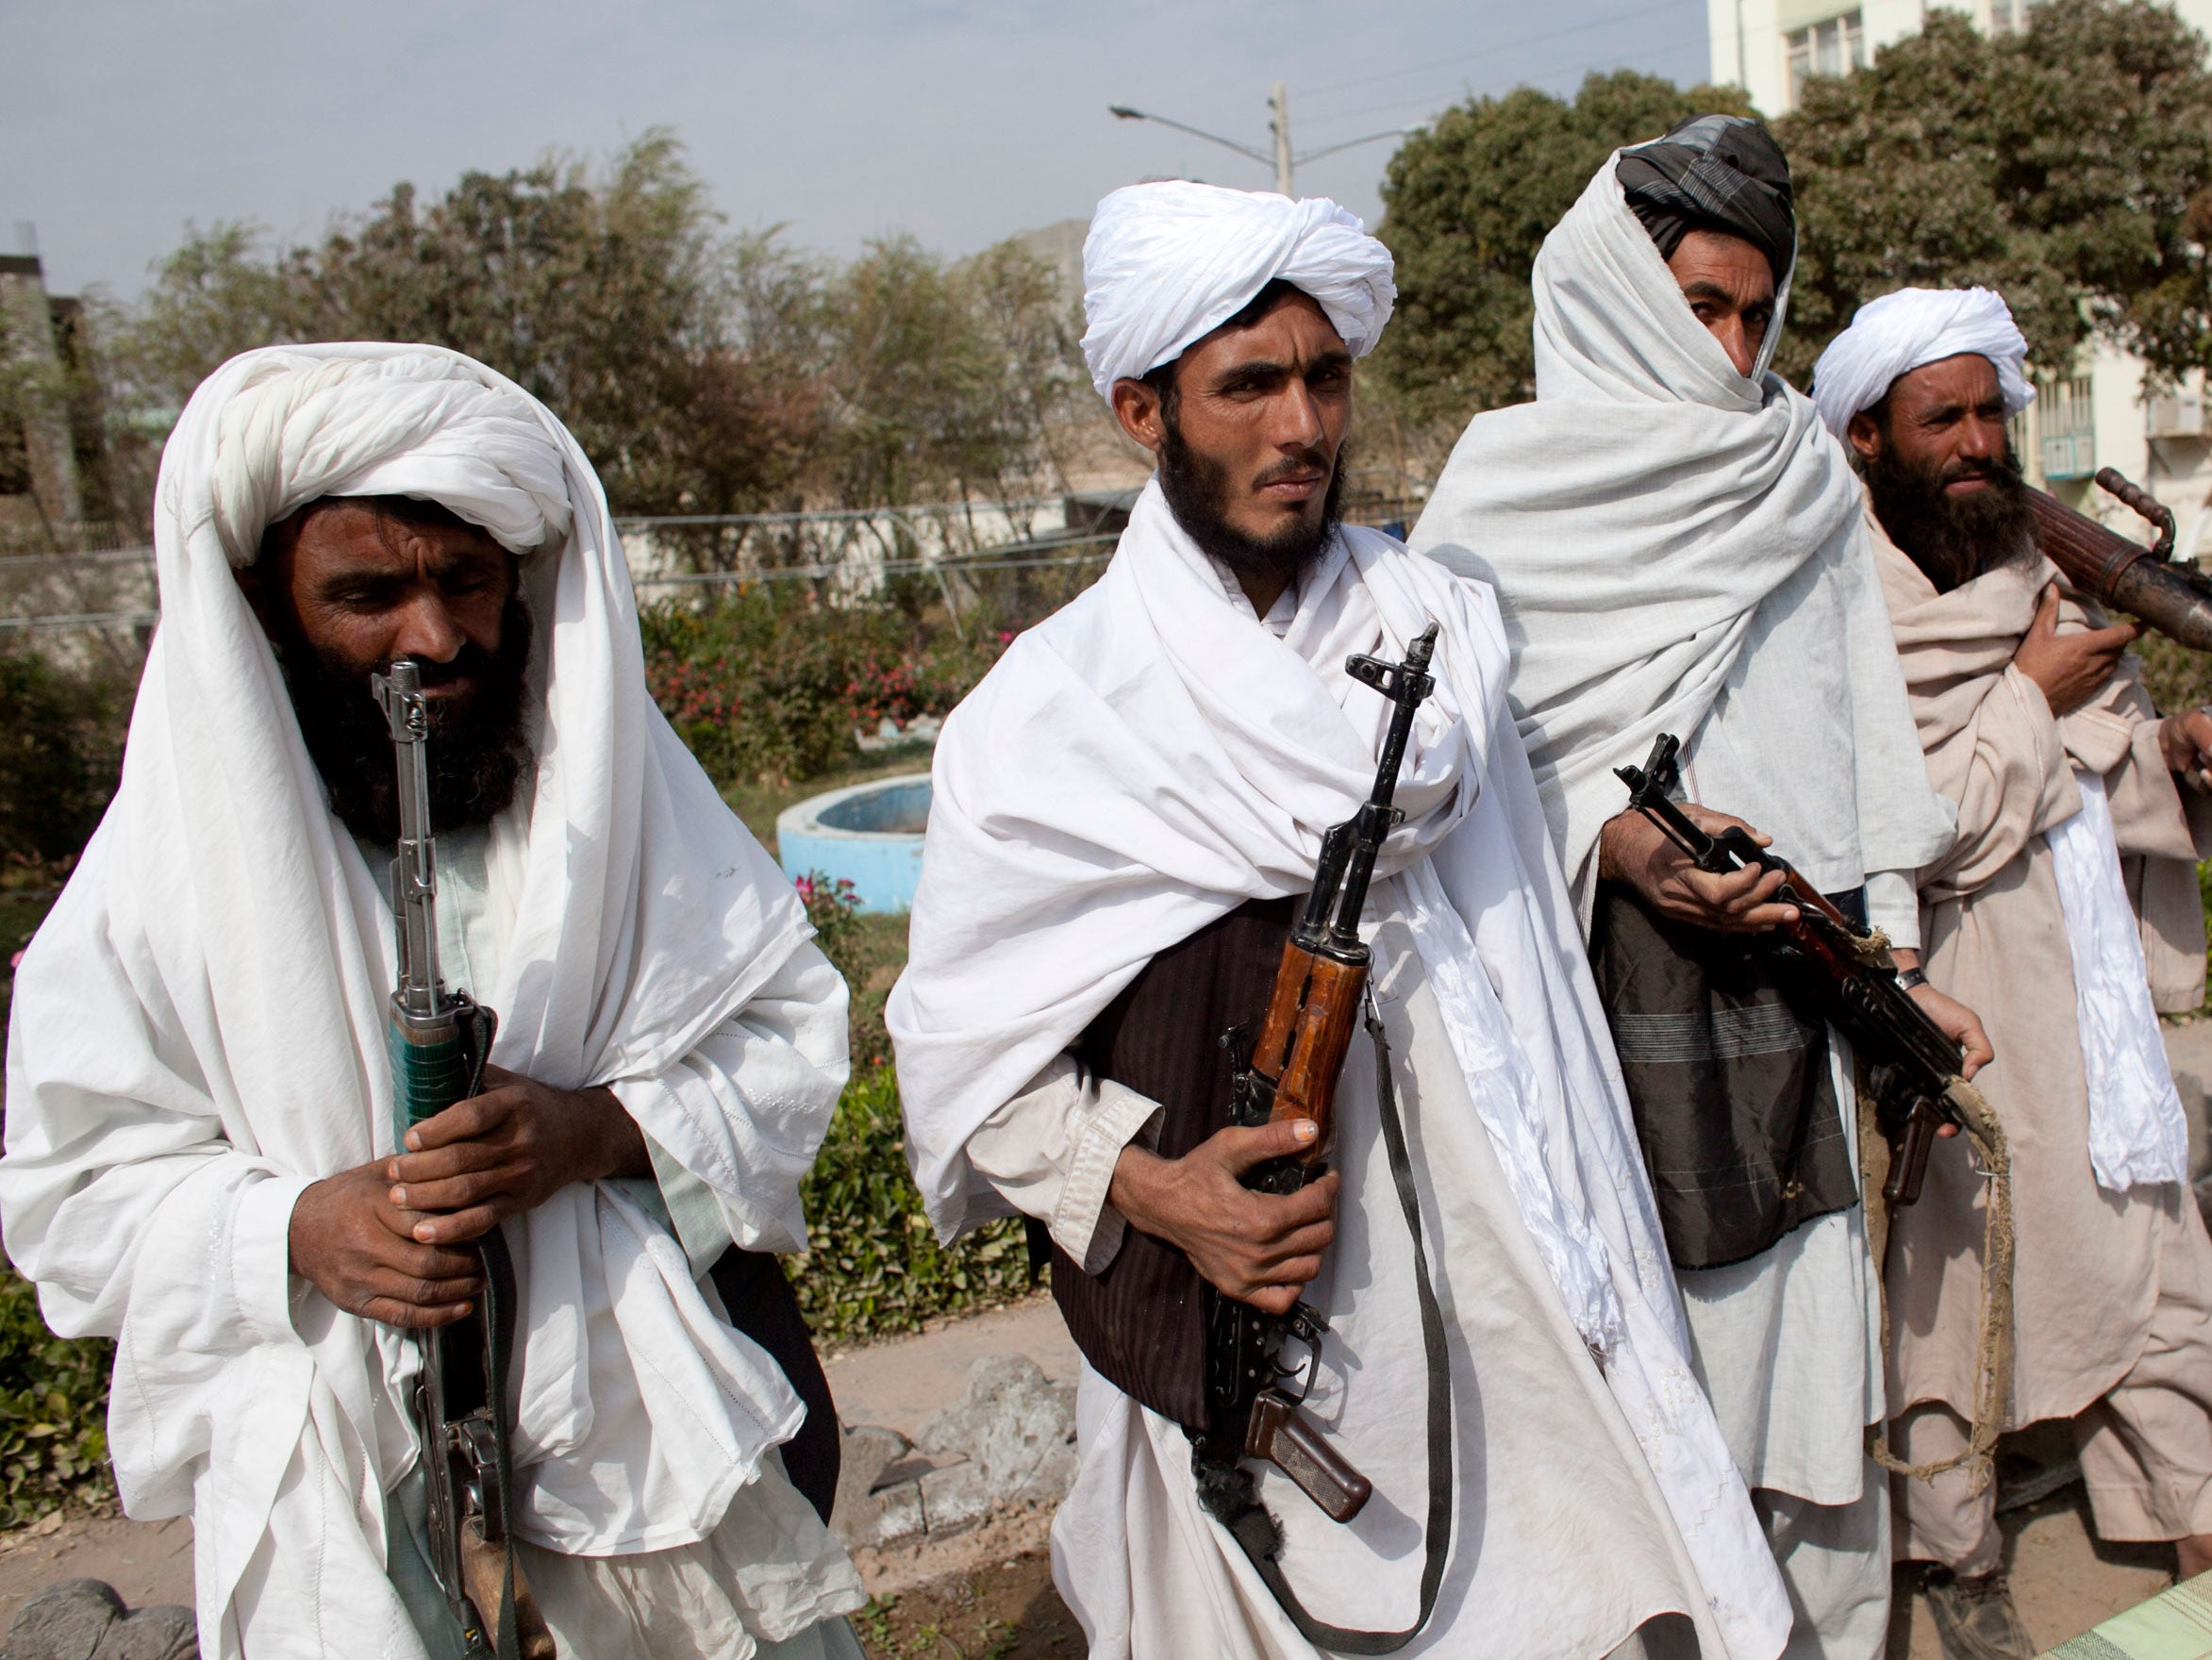 Armed Taliban militants surrender to government forces in Herat, Afghanistan in November 2010